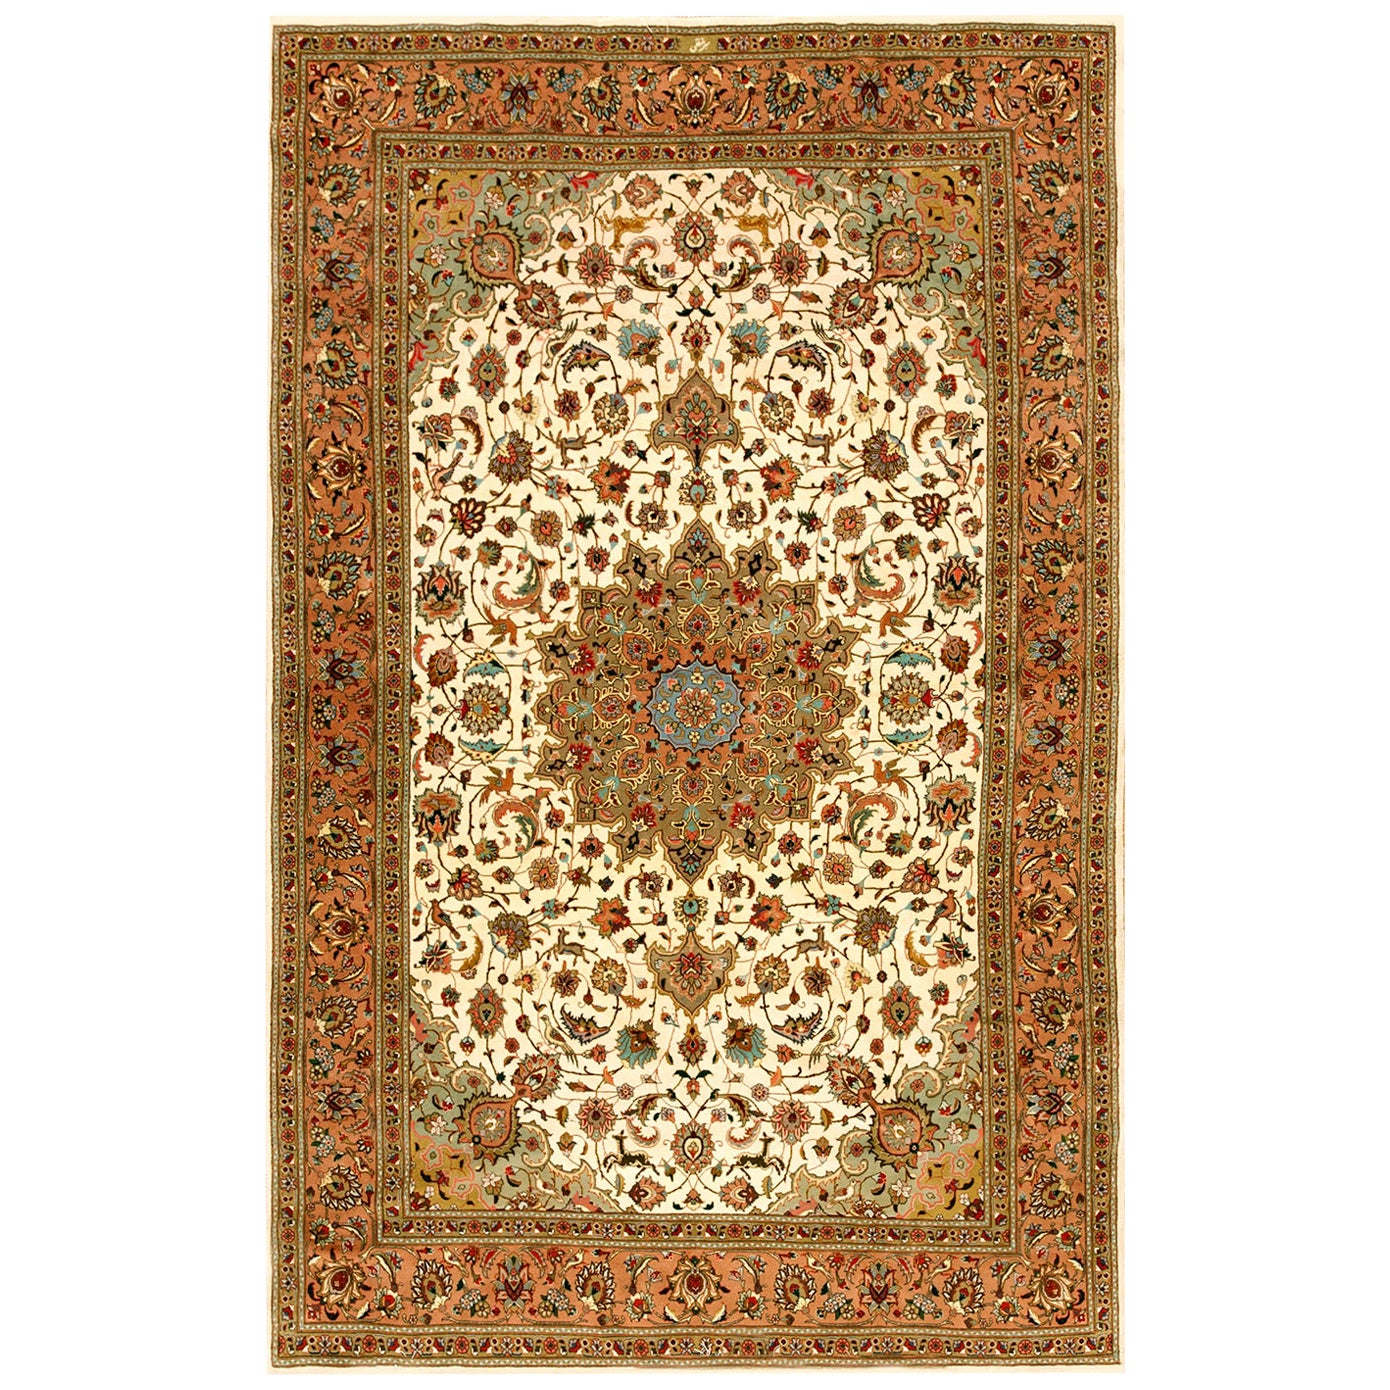 Mid 20th Persian Tabriz Carpet with Silk Highlights ( 5'11" x 9'6" - 180 x 290 ) For Sale